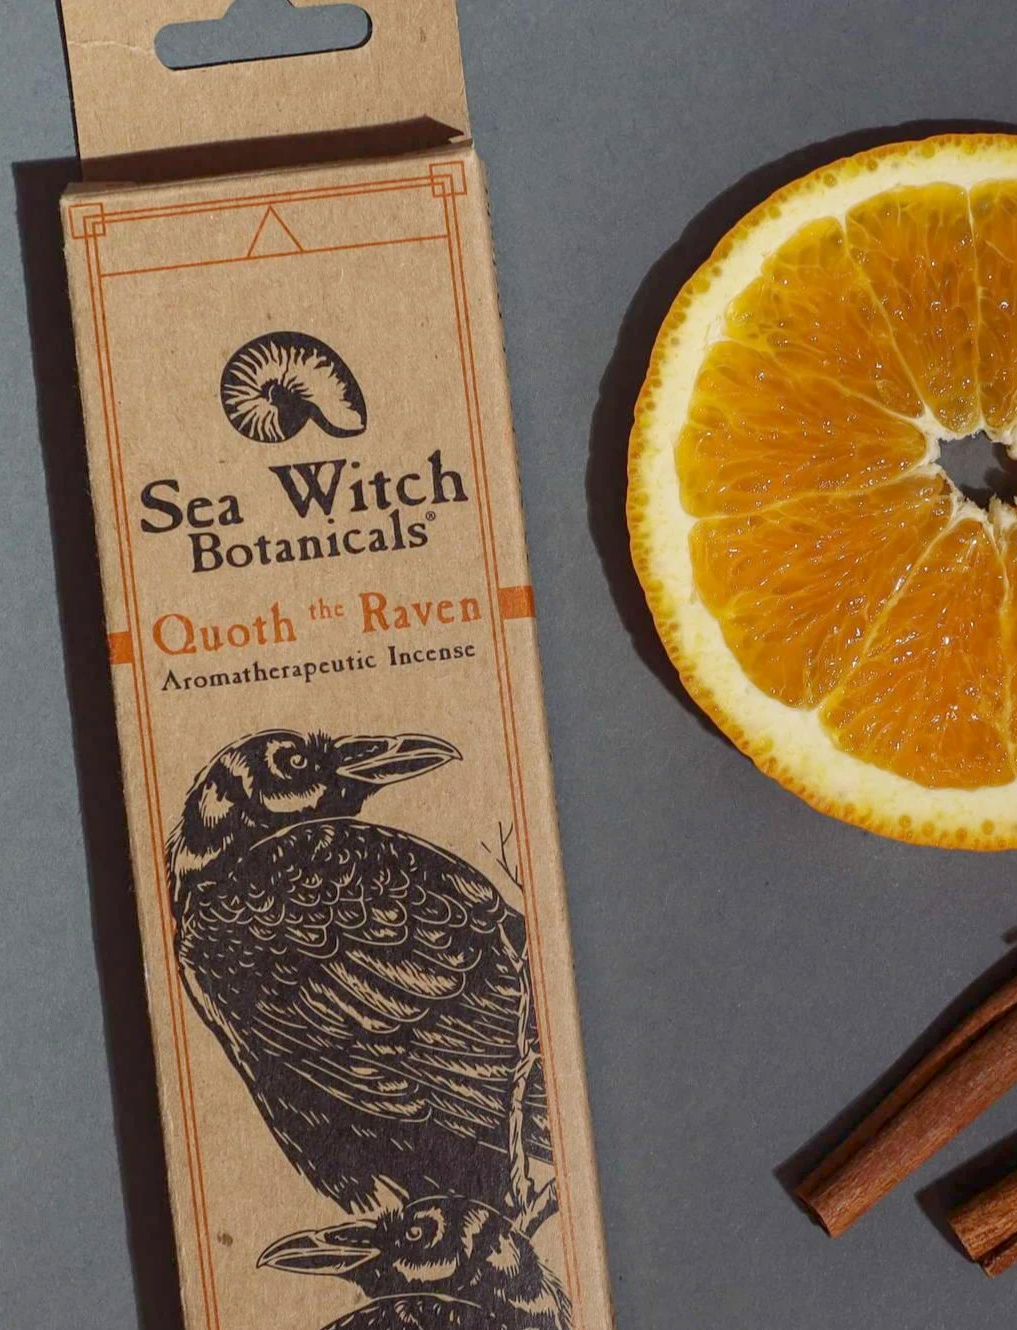 SEA WITCH BOTANICALS QUOTH THE RAVEN INCENSE